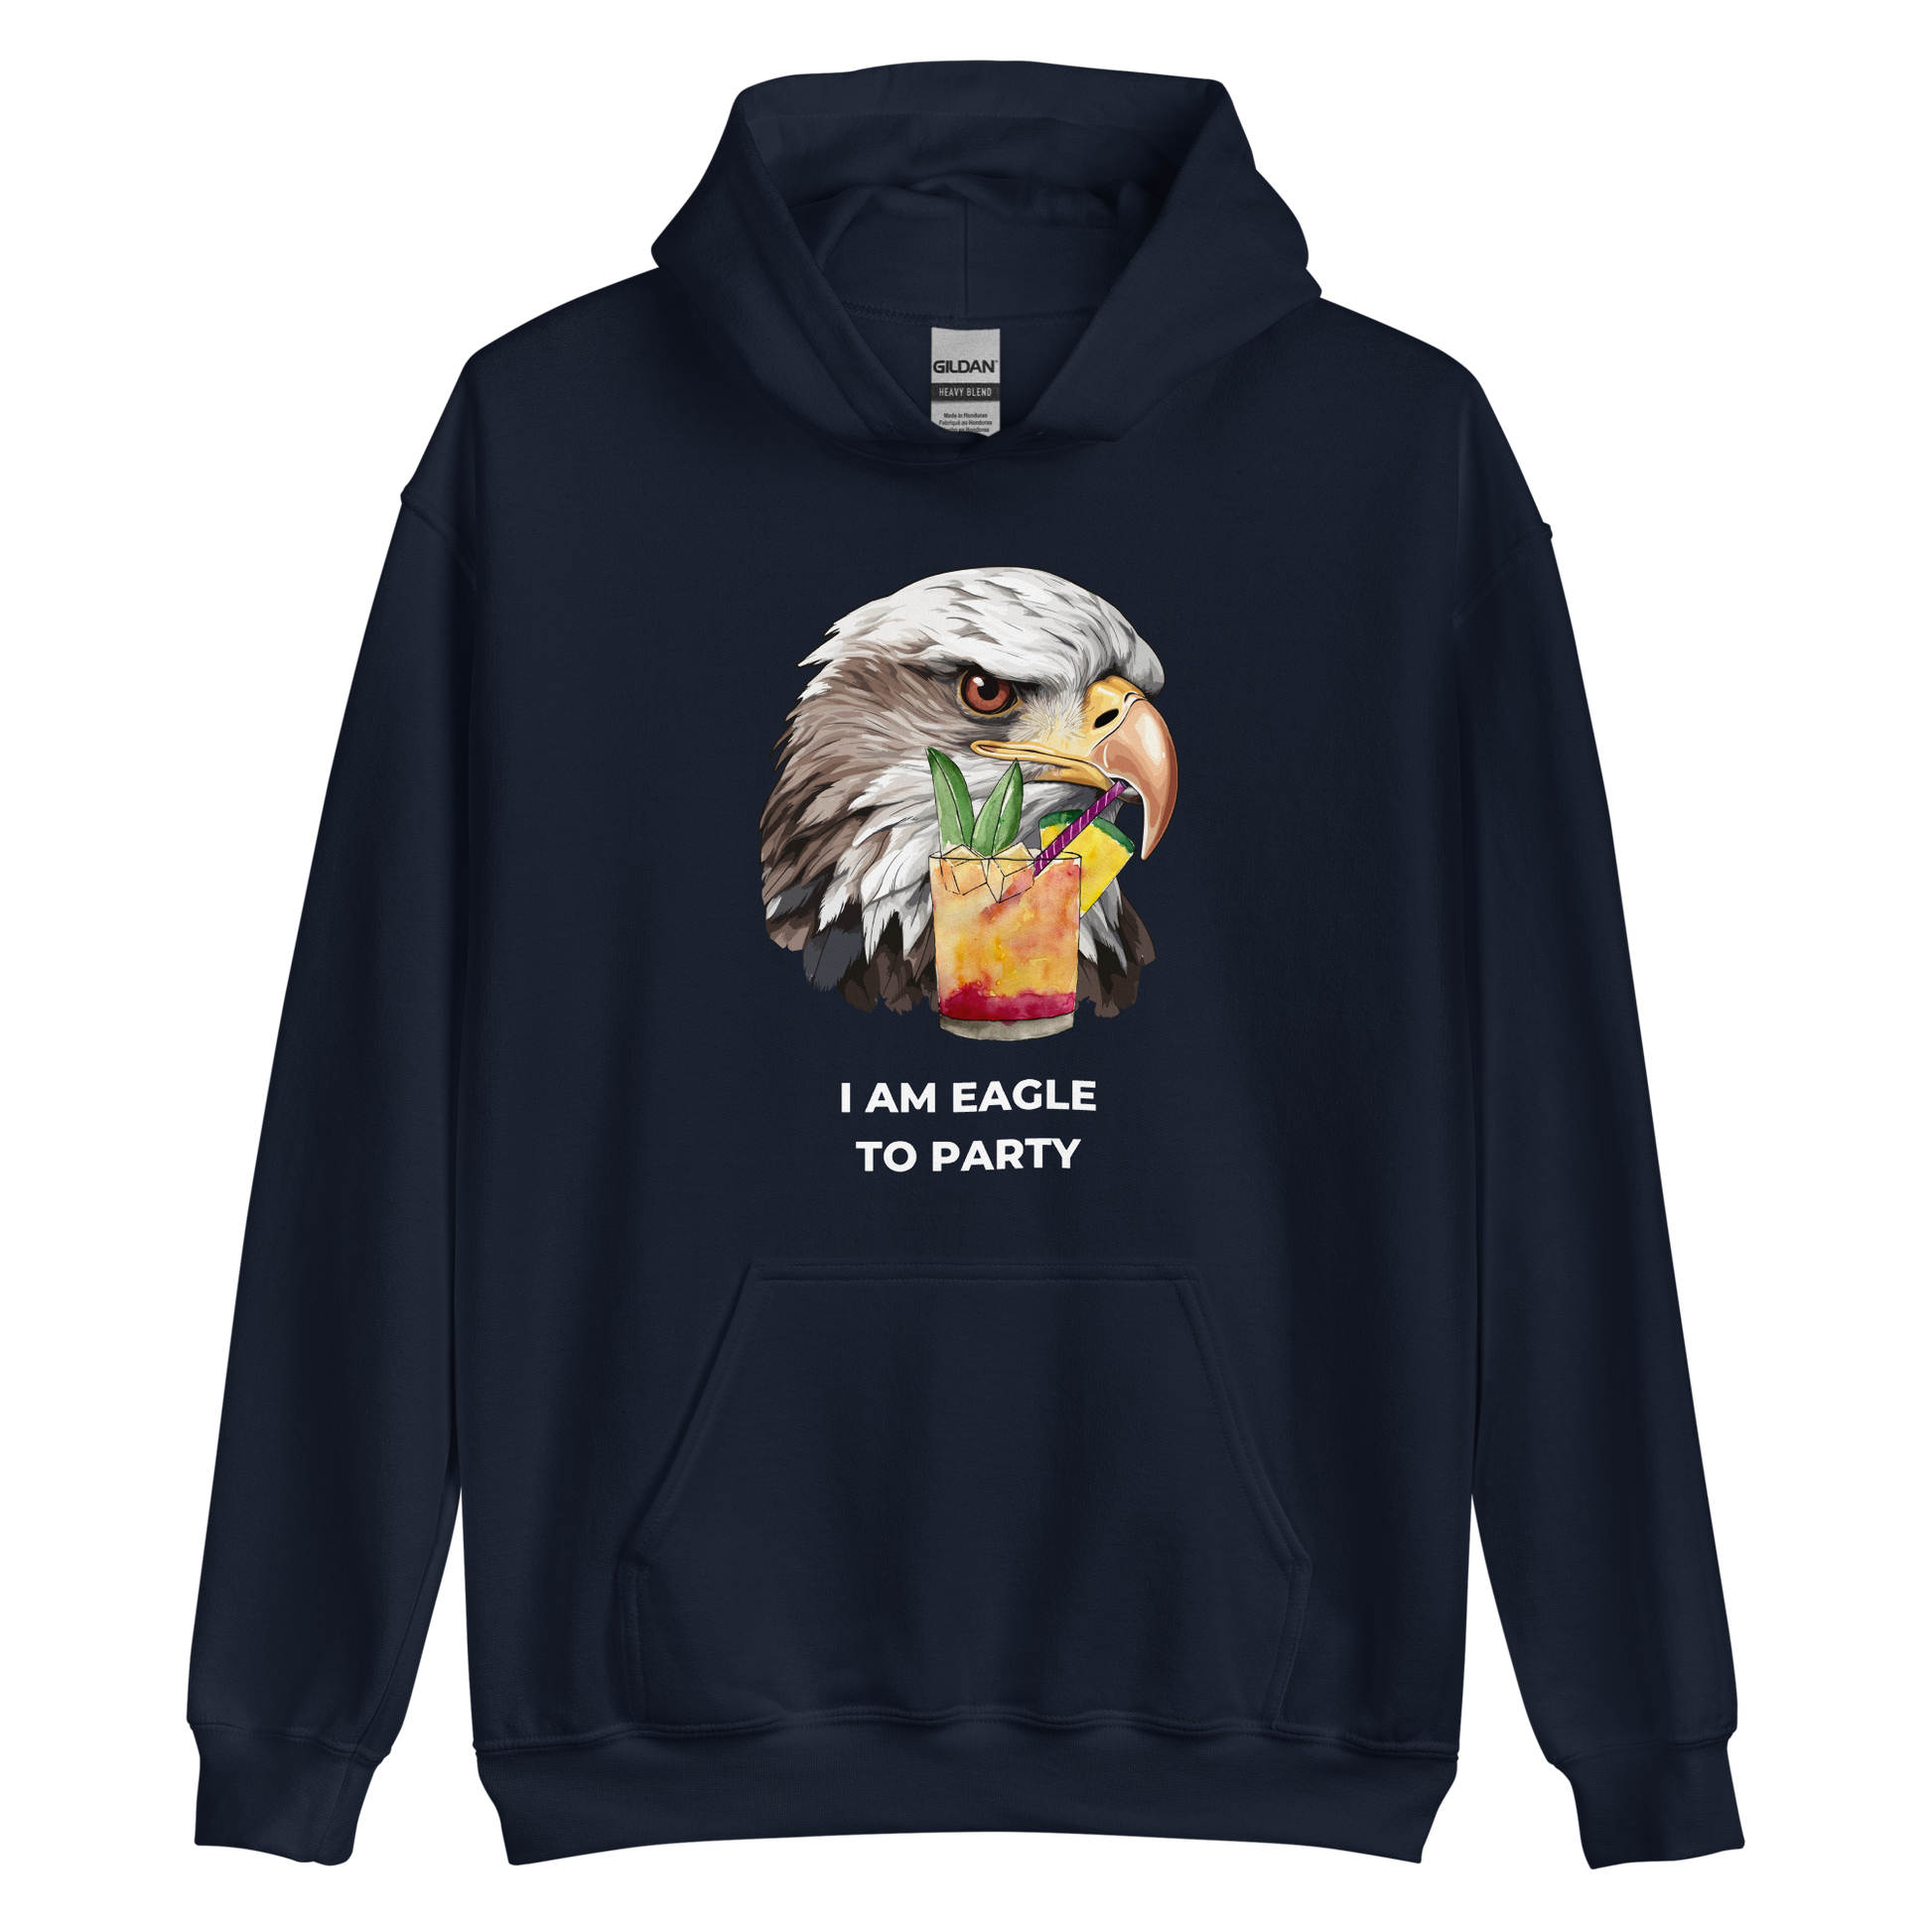 Navy Eagle Hoodie featuring a captivating I Am Eagle To Party graphic on the chest - Funny Graphic Eagle Party Hoodies - Boozy Fox